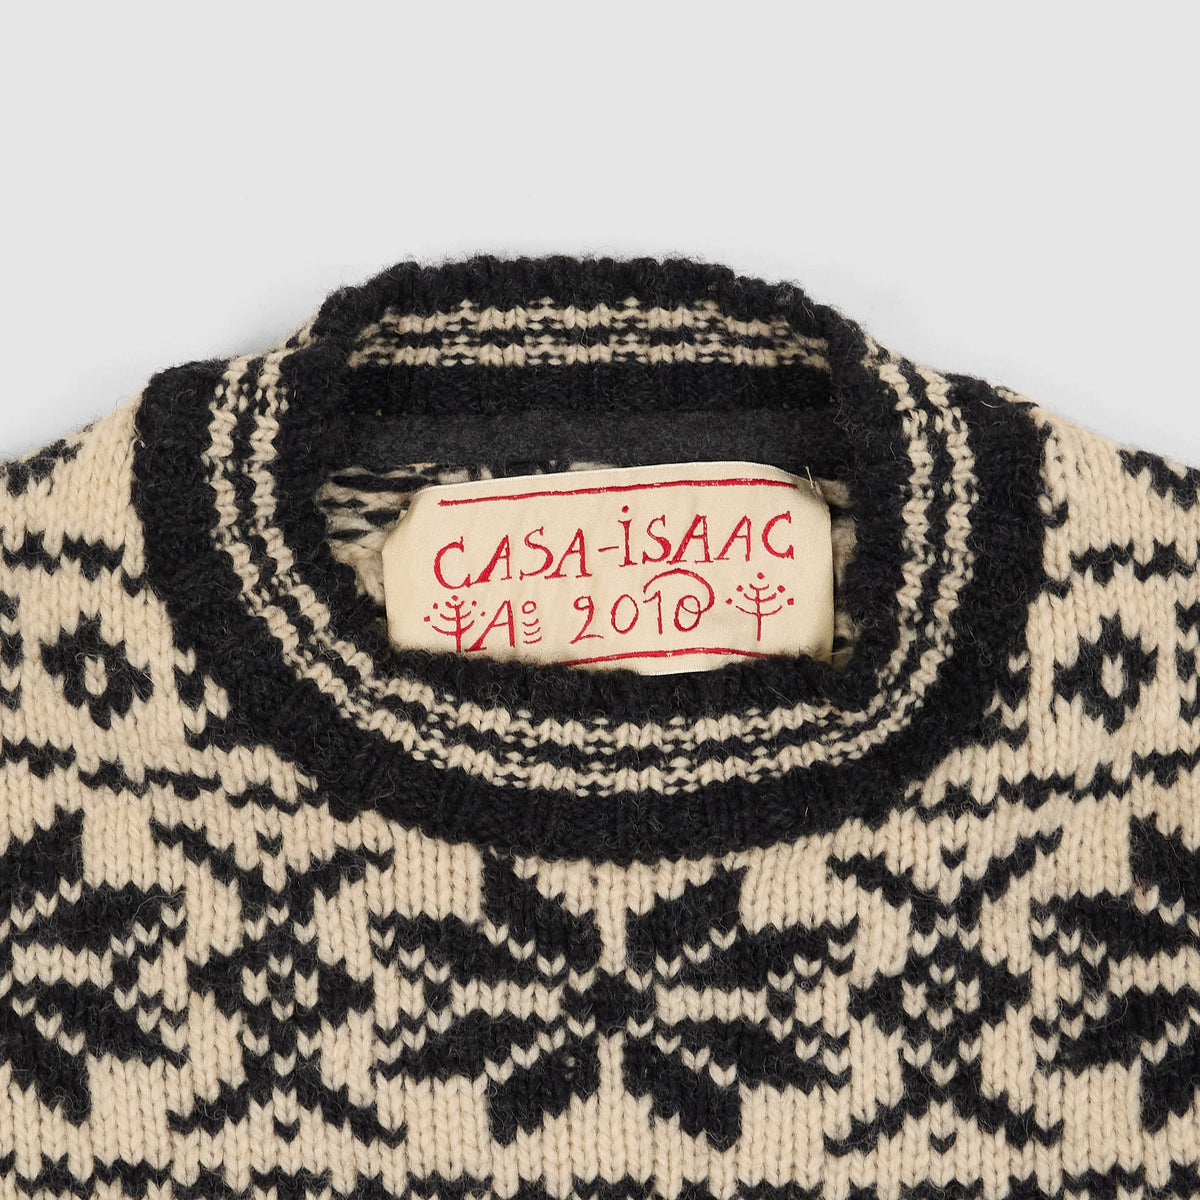 G.R.P. Country Knitted Wool  Crew Neck Jumper